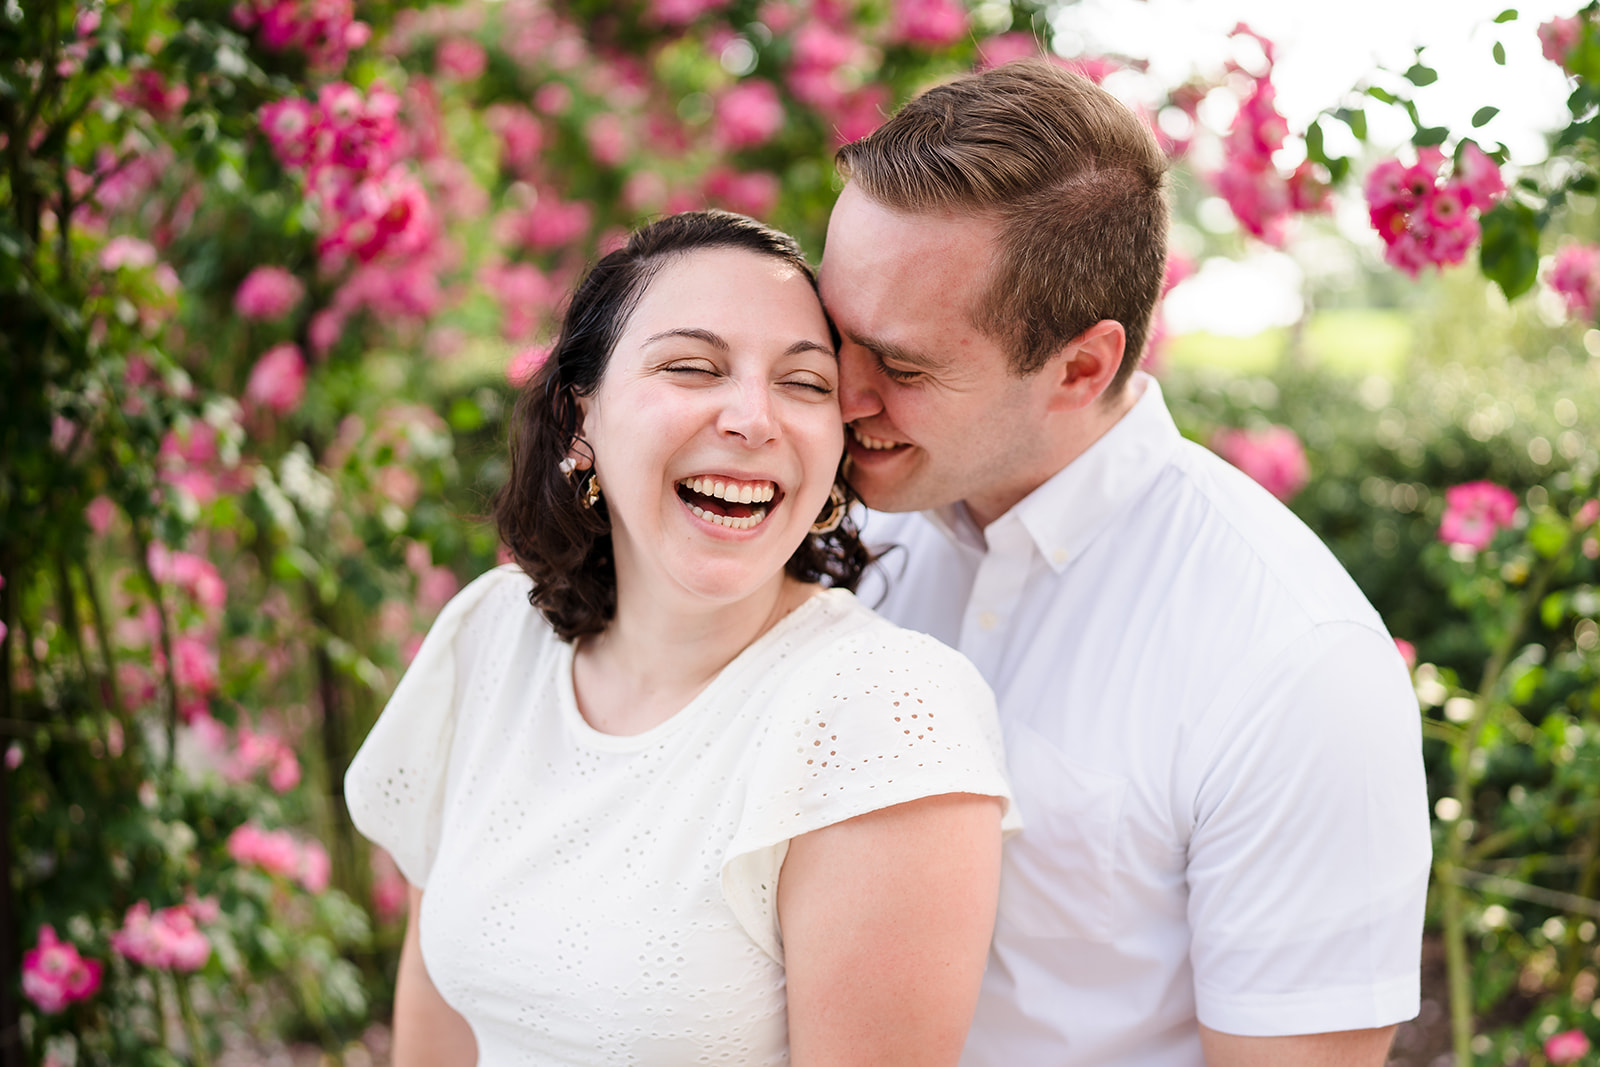 Couple Laughing in a field of roses